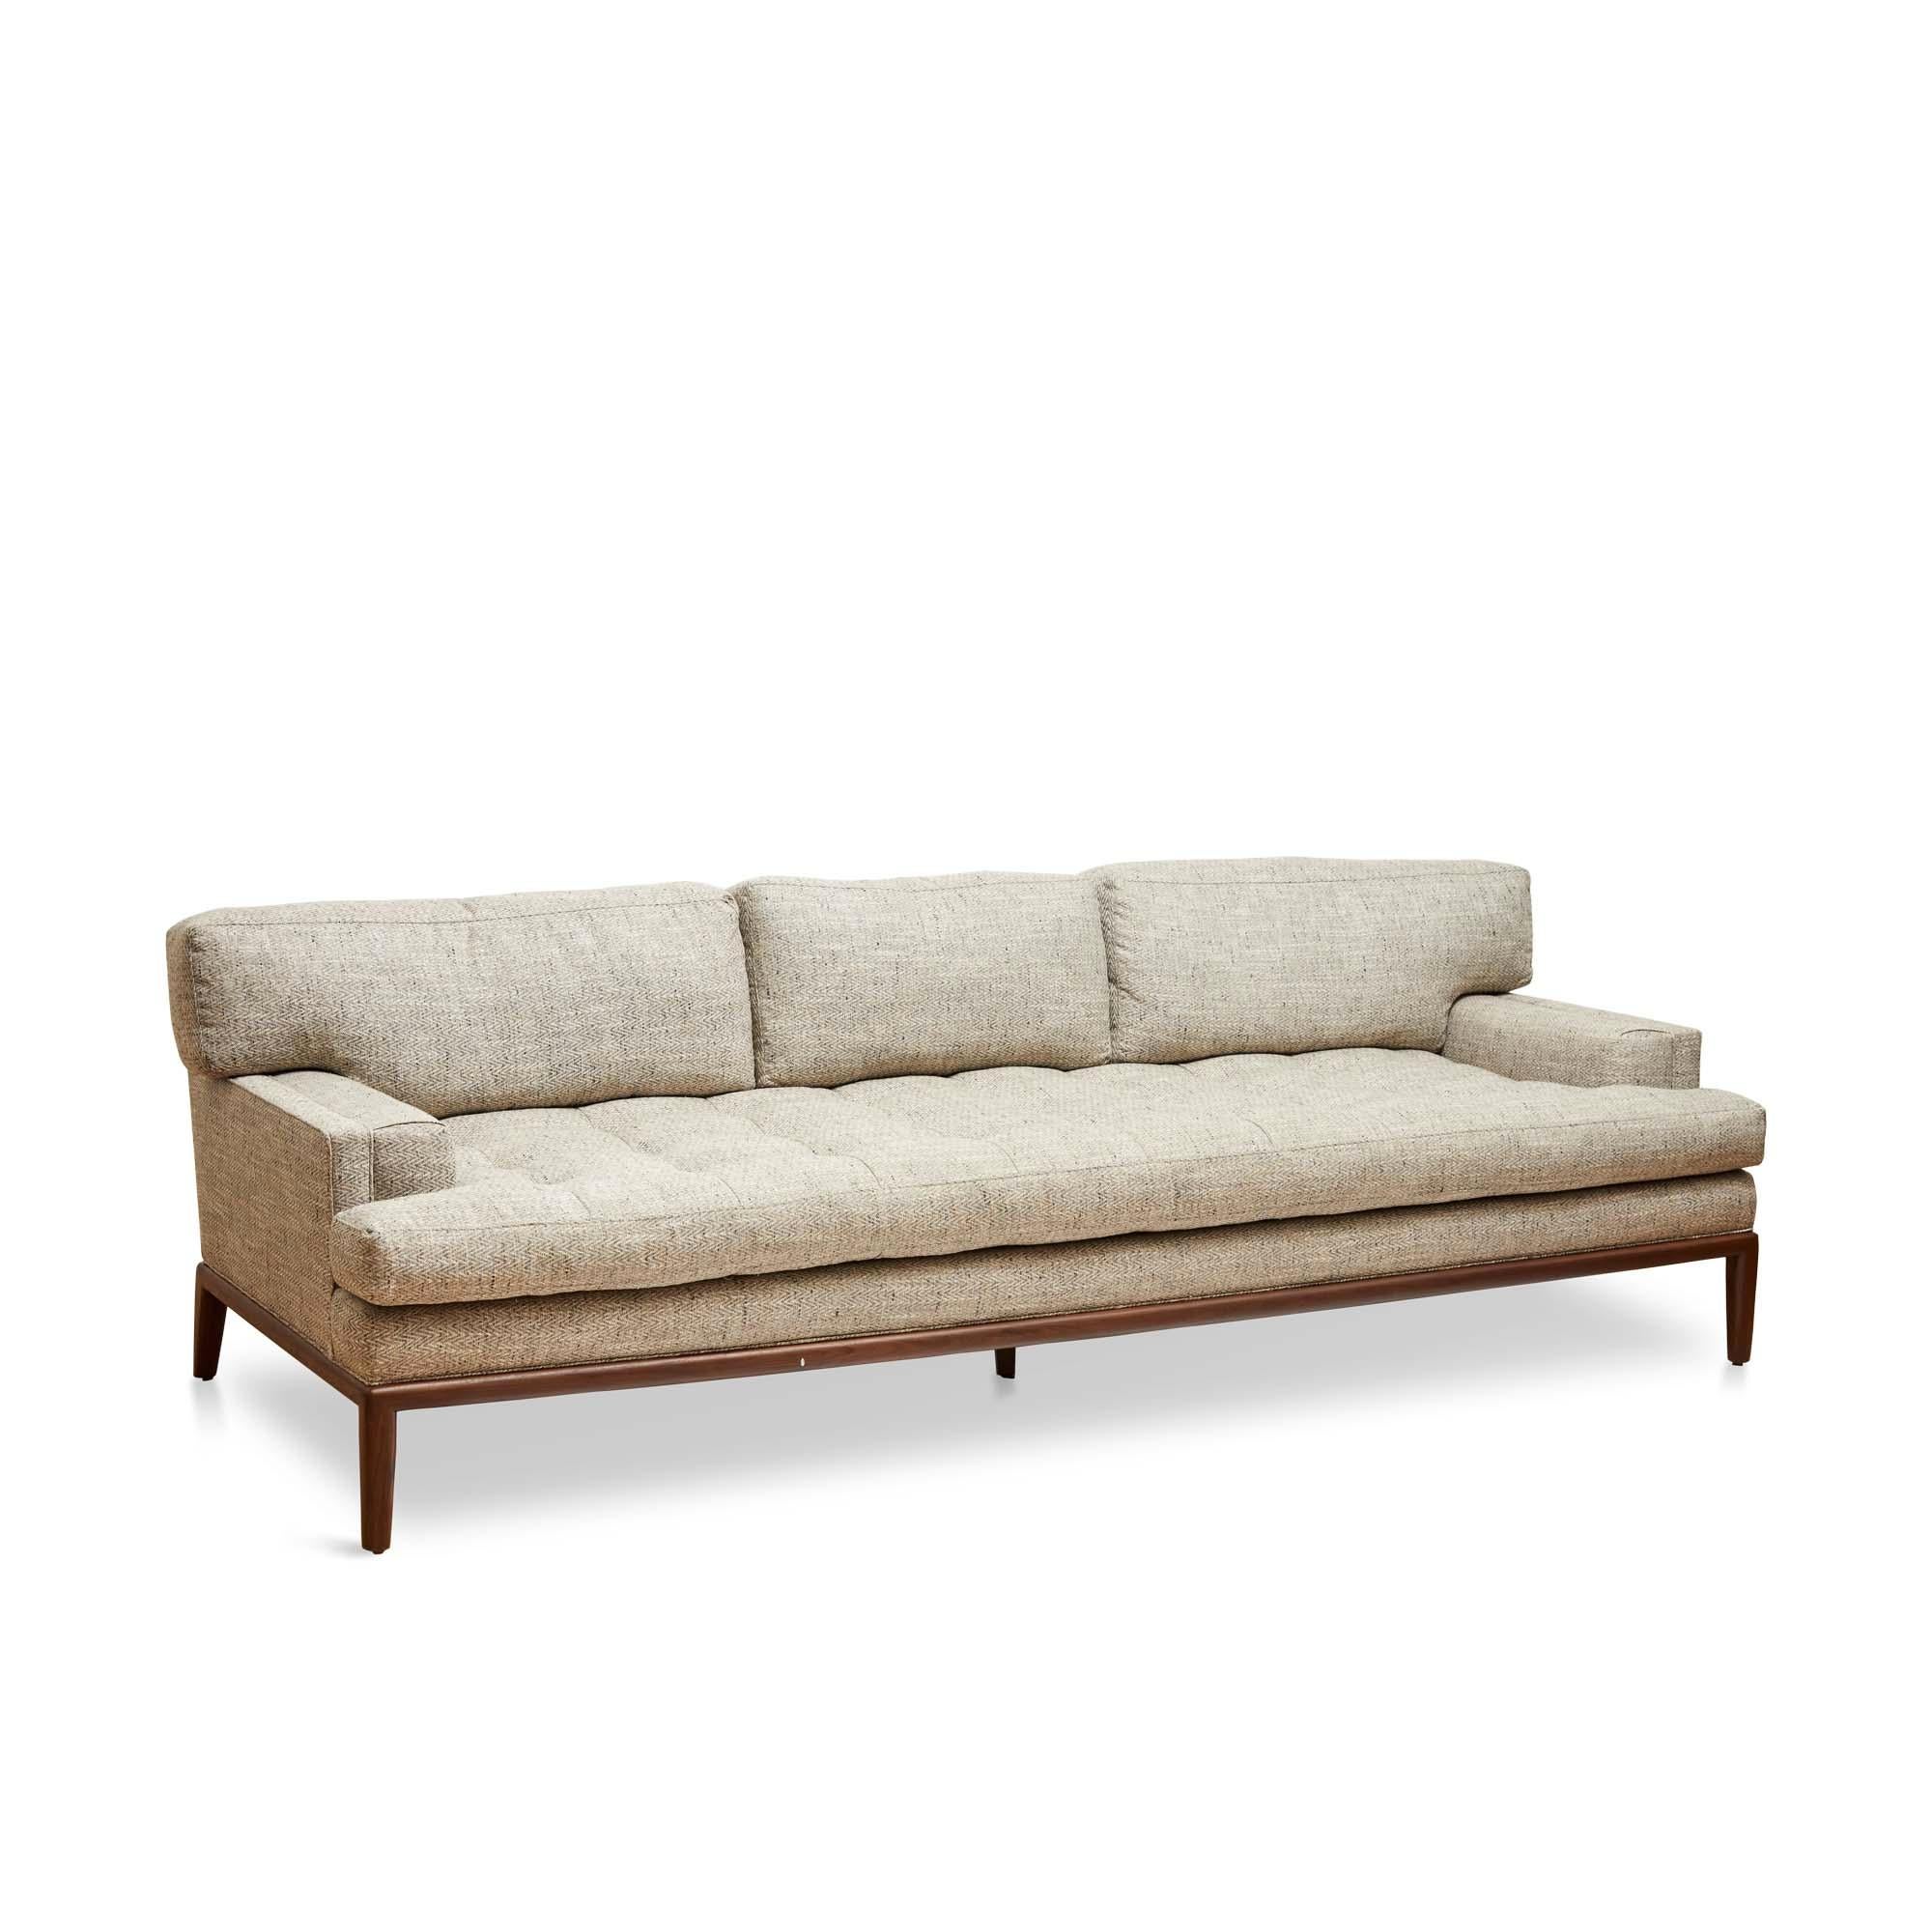 The Forster sofa is a midcentury inspired sofa with a loose tufted seat, loose back cushions, and piped details. The sofa rests atop a simple, rounded wood base.

The Lawson-Fenning Collection is designed and handmade in Los Angeles, California.